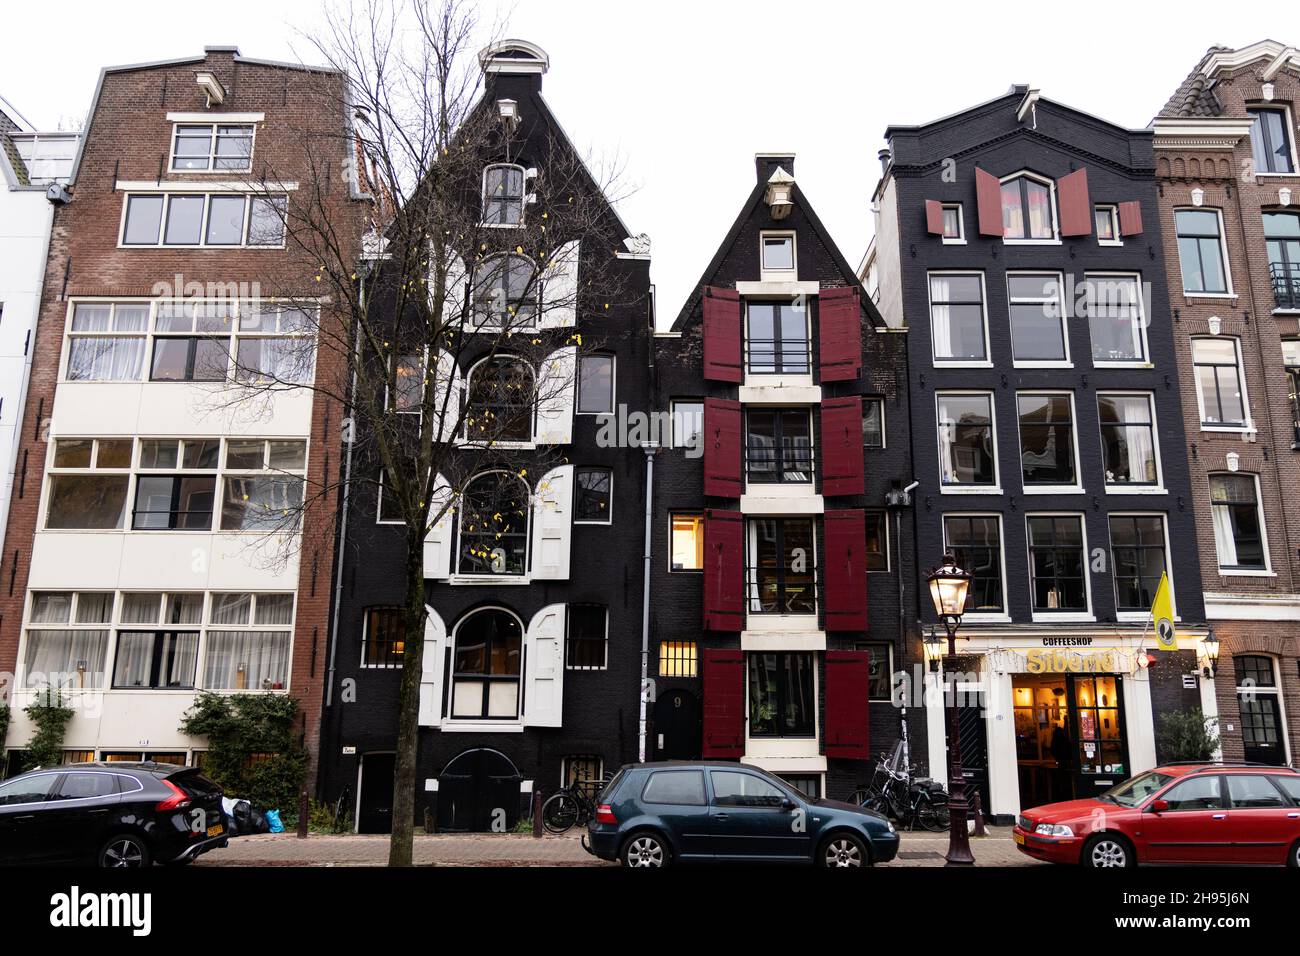 Traditional buildings on Brouwersgracht in Amsterdam, Netherlands. The colored shutters on former breweries depict which variety of beer they brewed. Stock Photo